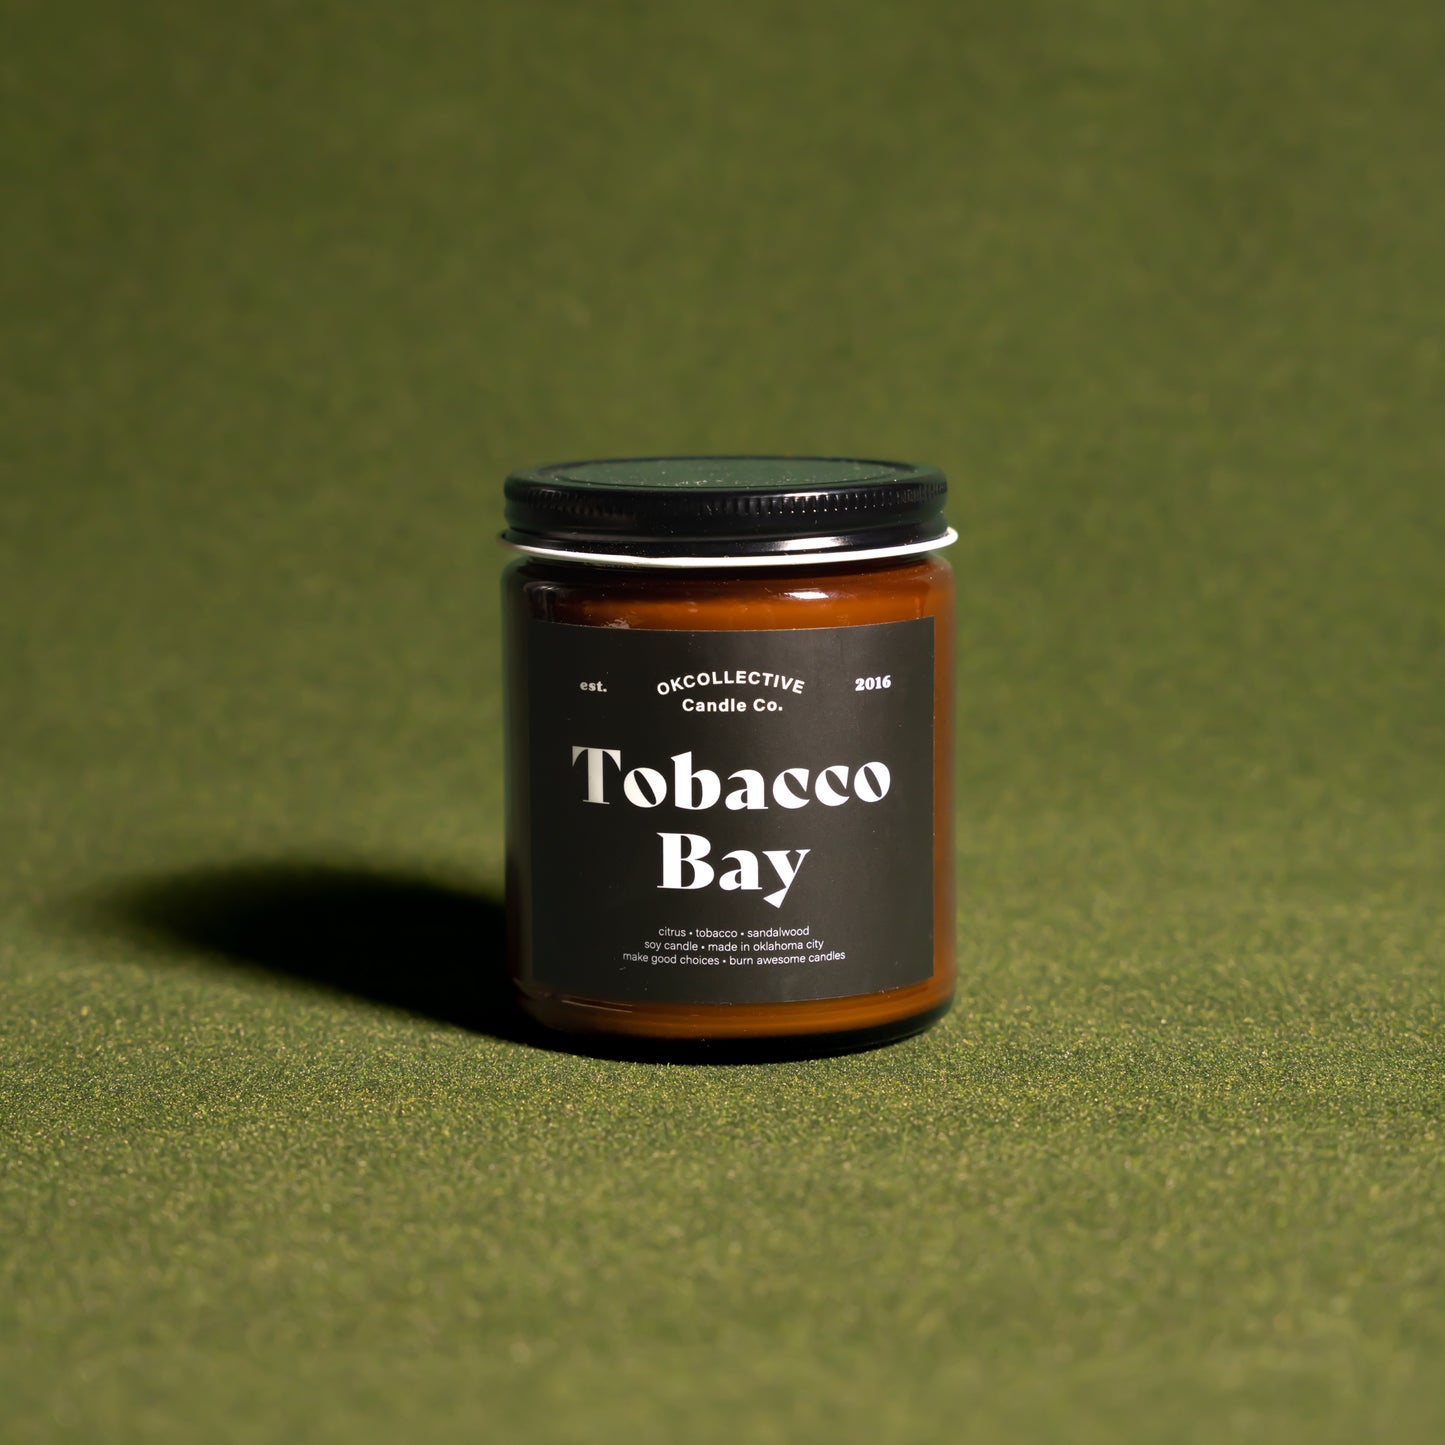 Tobacco Bay Soy Candle